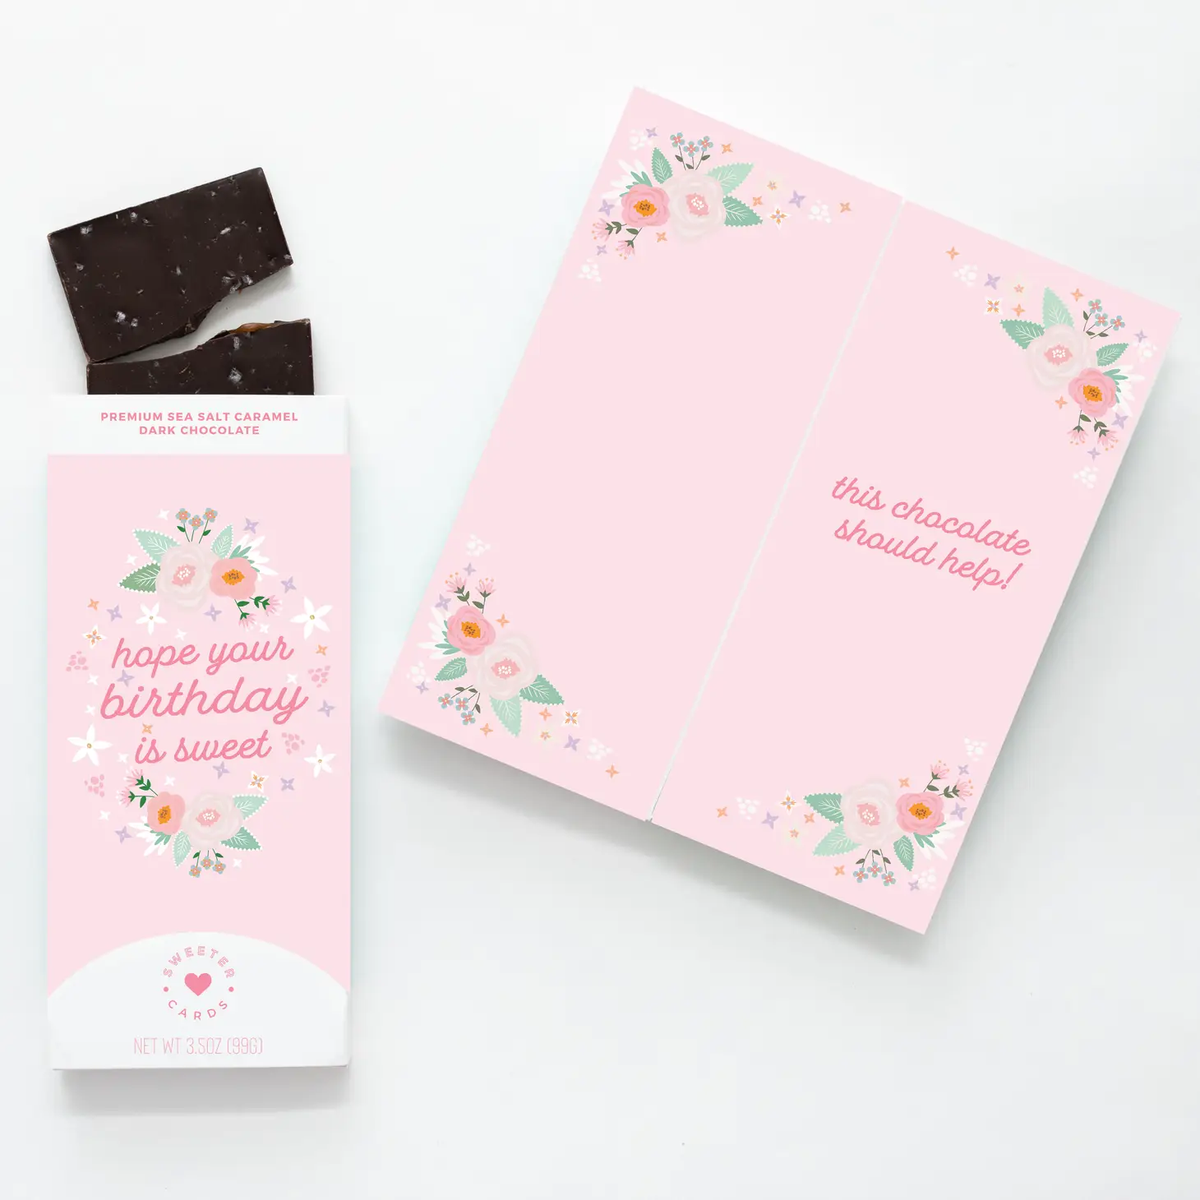 Hope Your Birthday Is Sweet–Chocolate Bar and Greeting Card!-270 Home/Gift-Sweeter Cards Chocolate Bar + Greeting Card-Coastal Bloom Boutique, find the trendiest versions of the popular styles and looks Located in Indialantic, FL